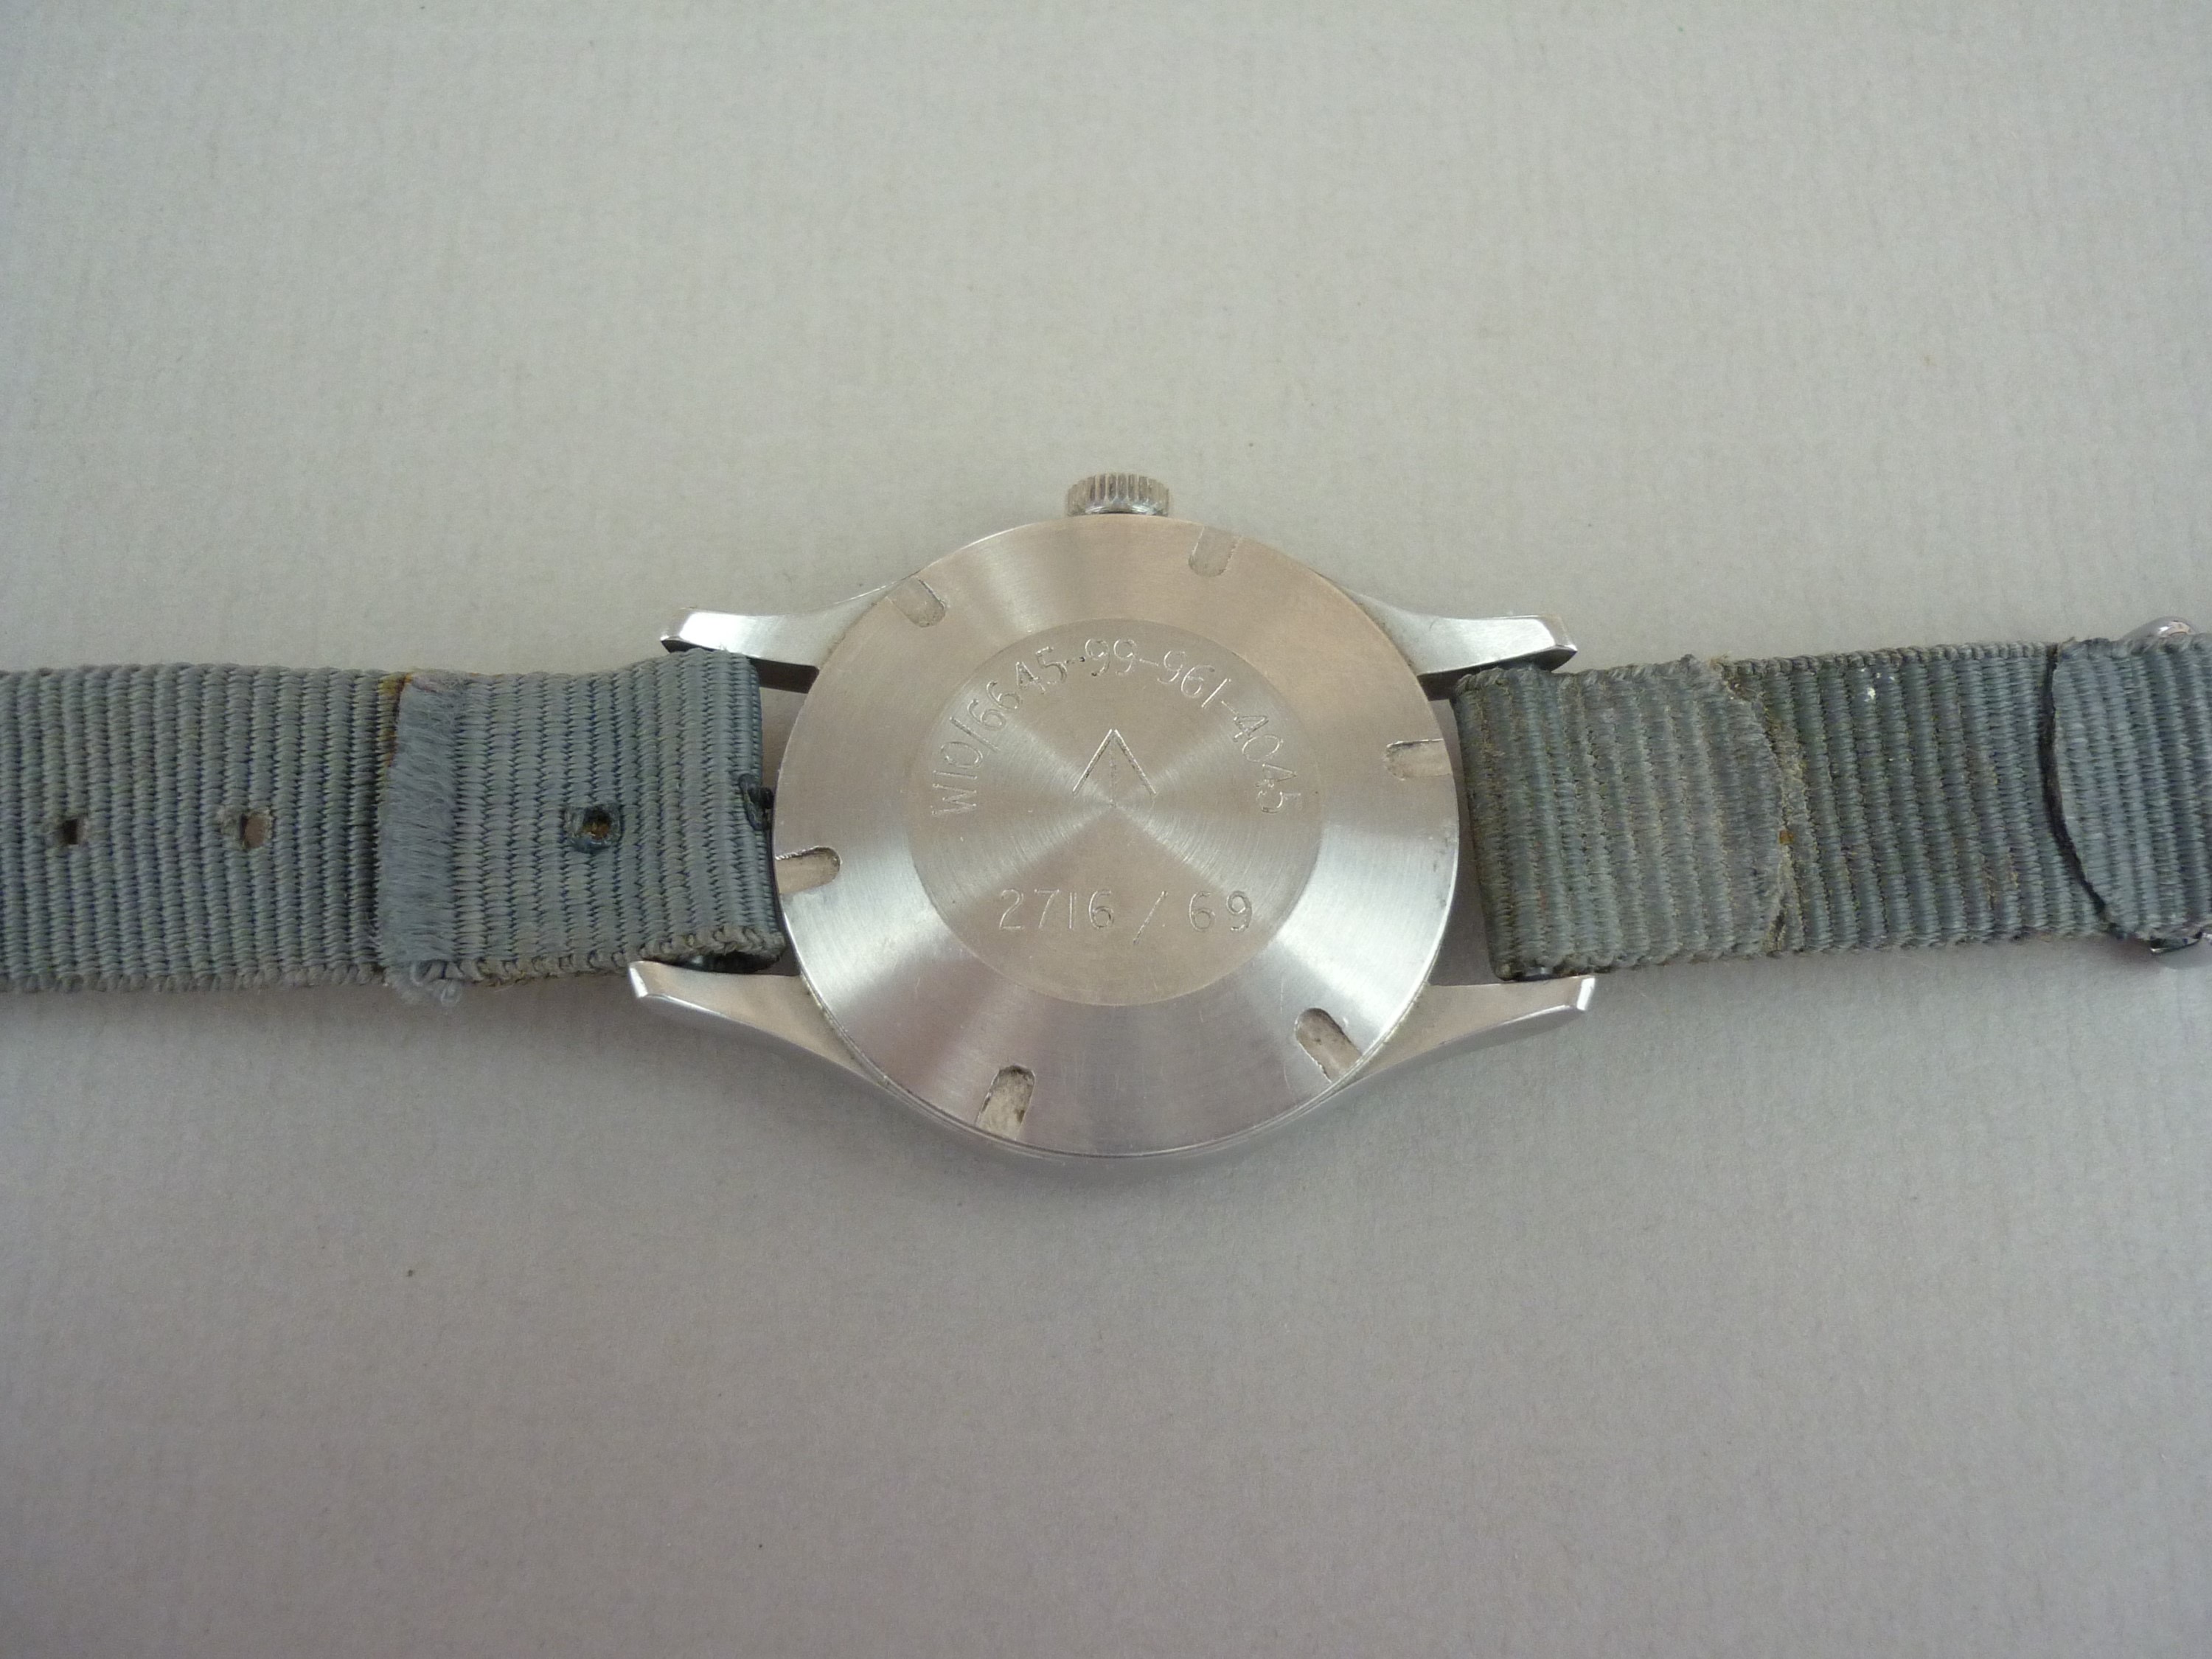 A 1969 British military issue Smiths W10 wrist watch - Image 3 of 4